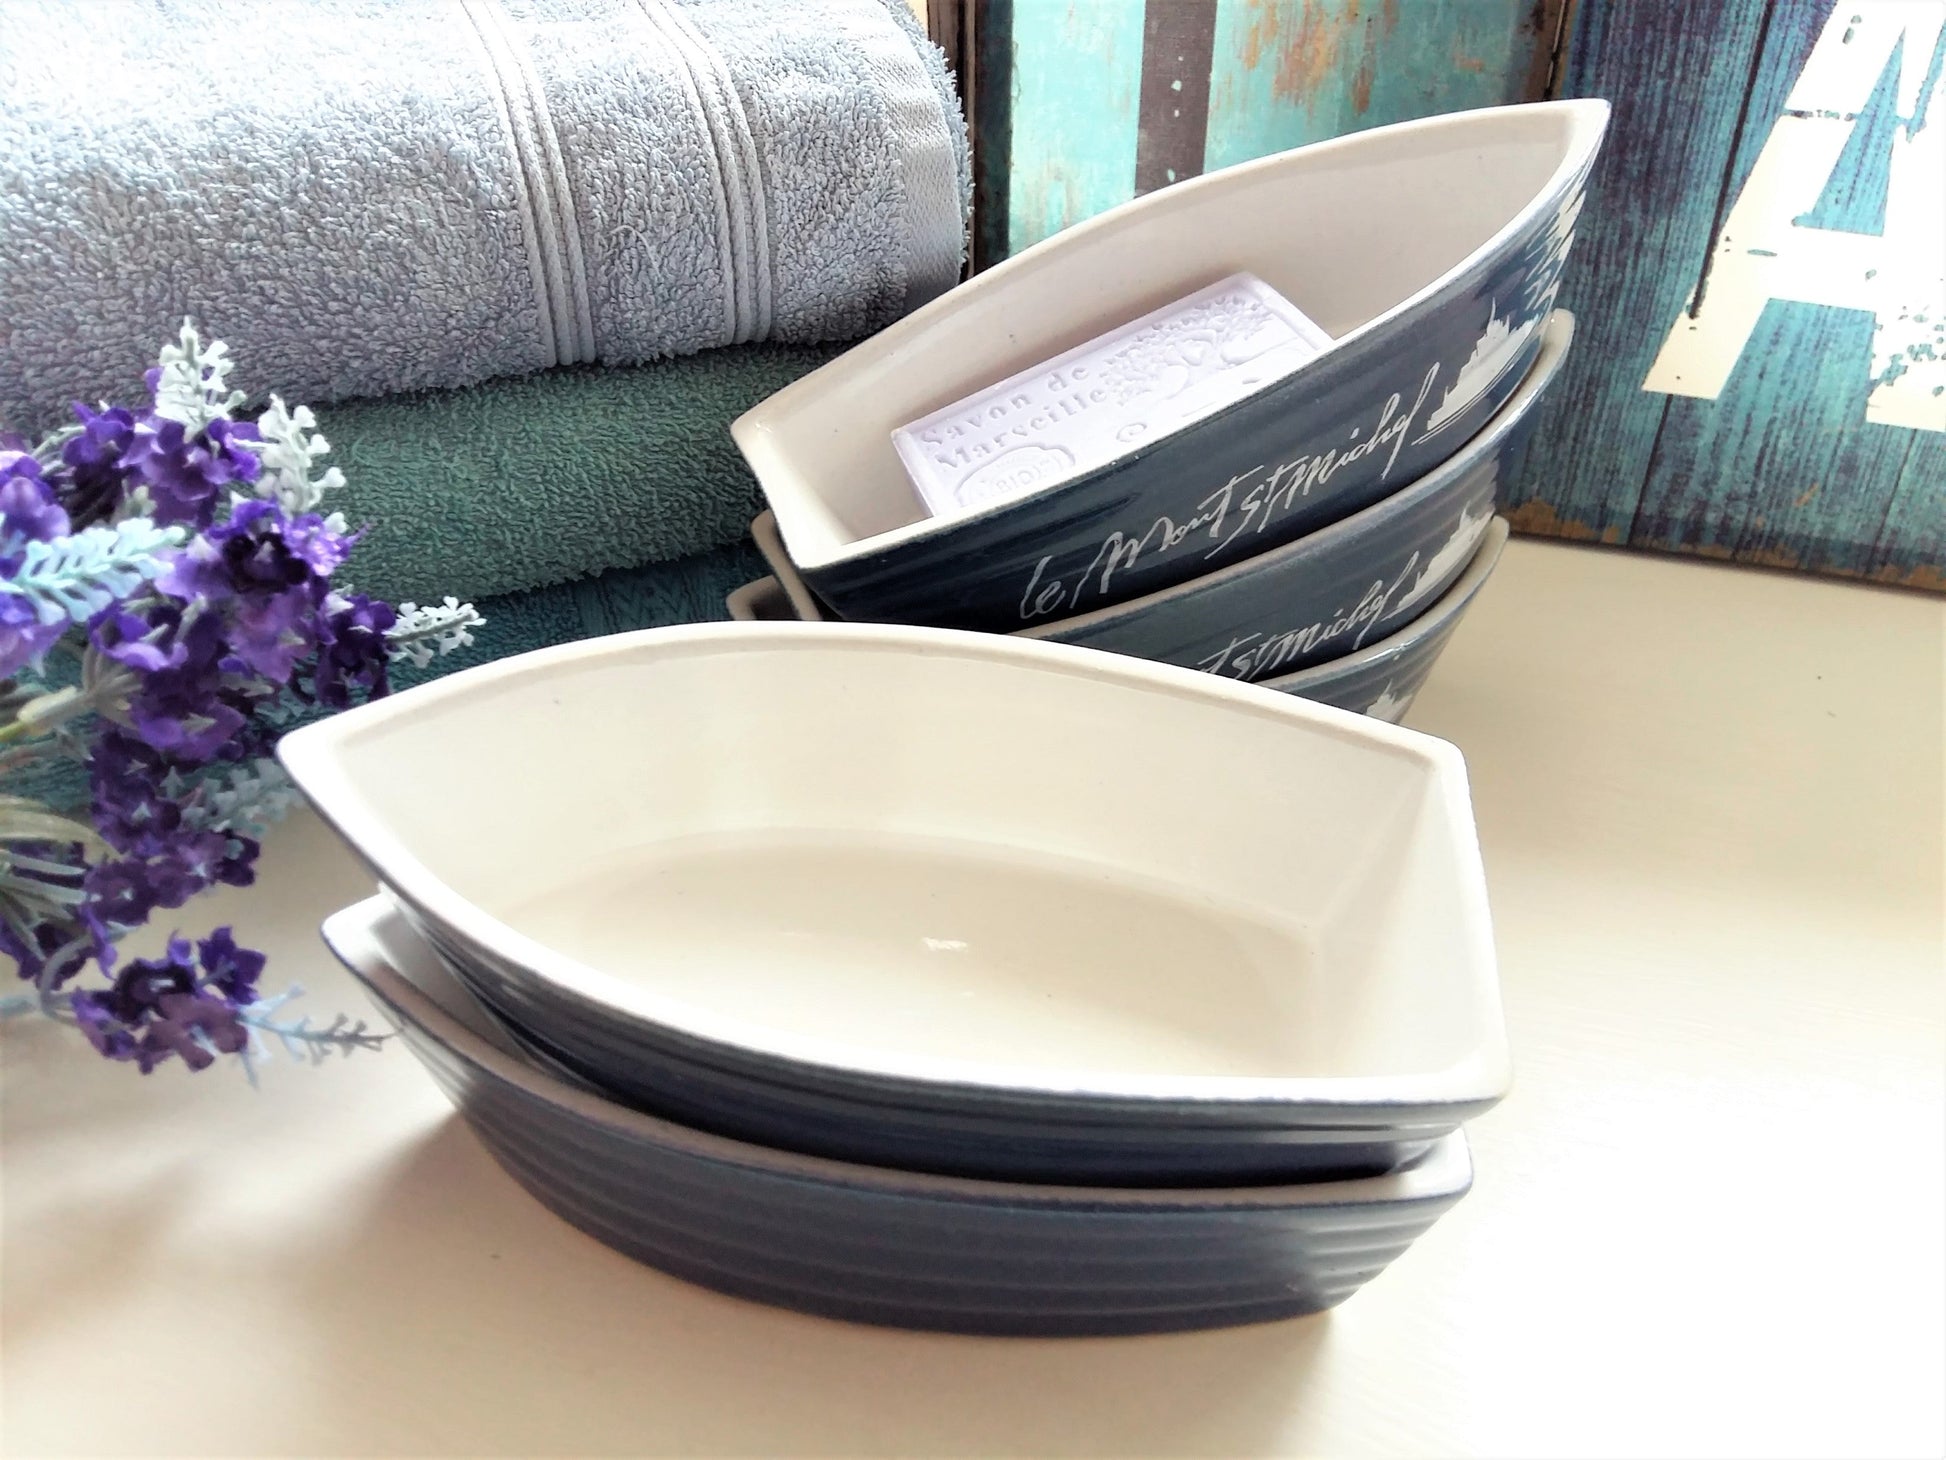 Set of FIVE Boat Shape Soap Dishes from Le Mont St. Michel. from Tiggy & Pip - €99.00! Shop now at Tiggy and Pip